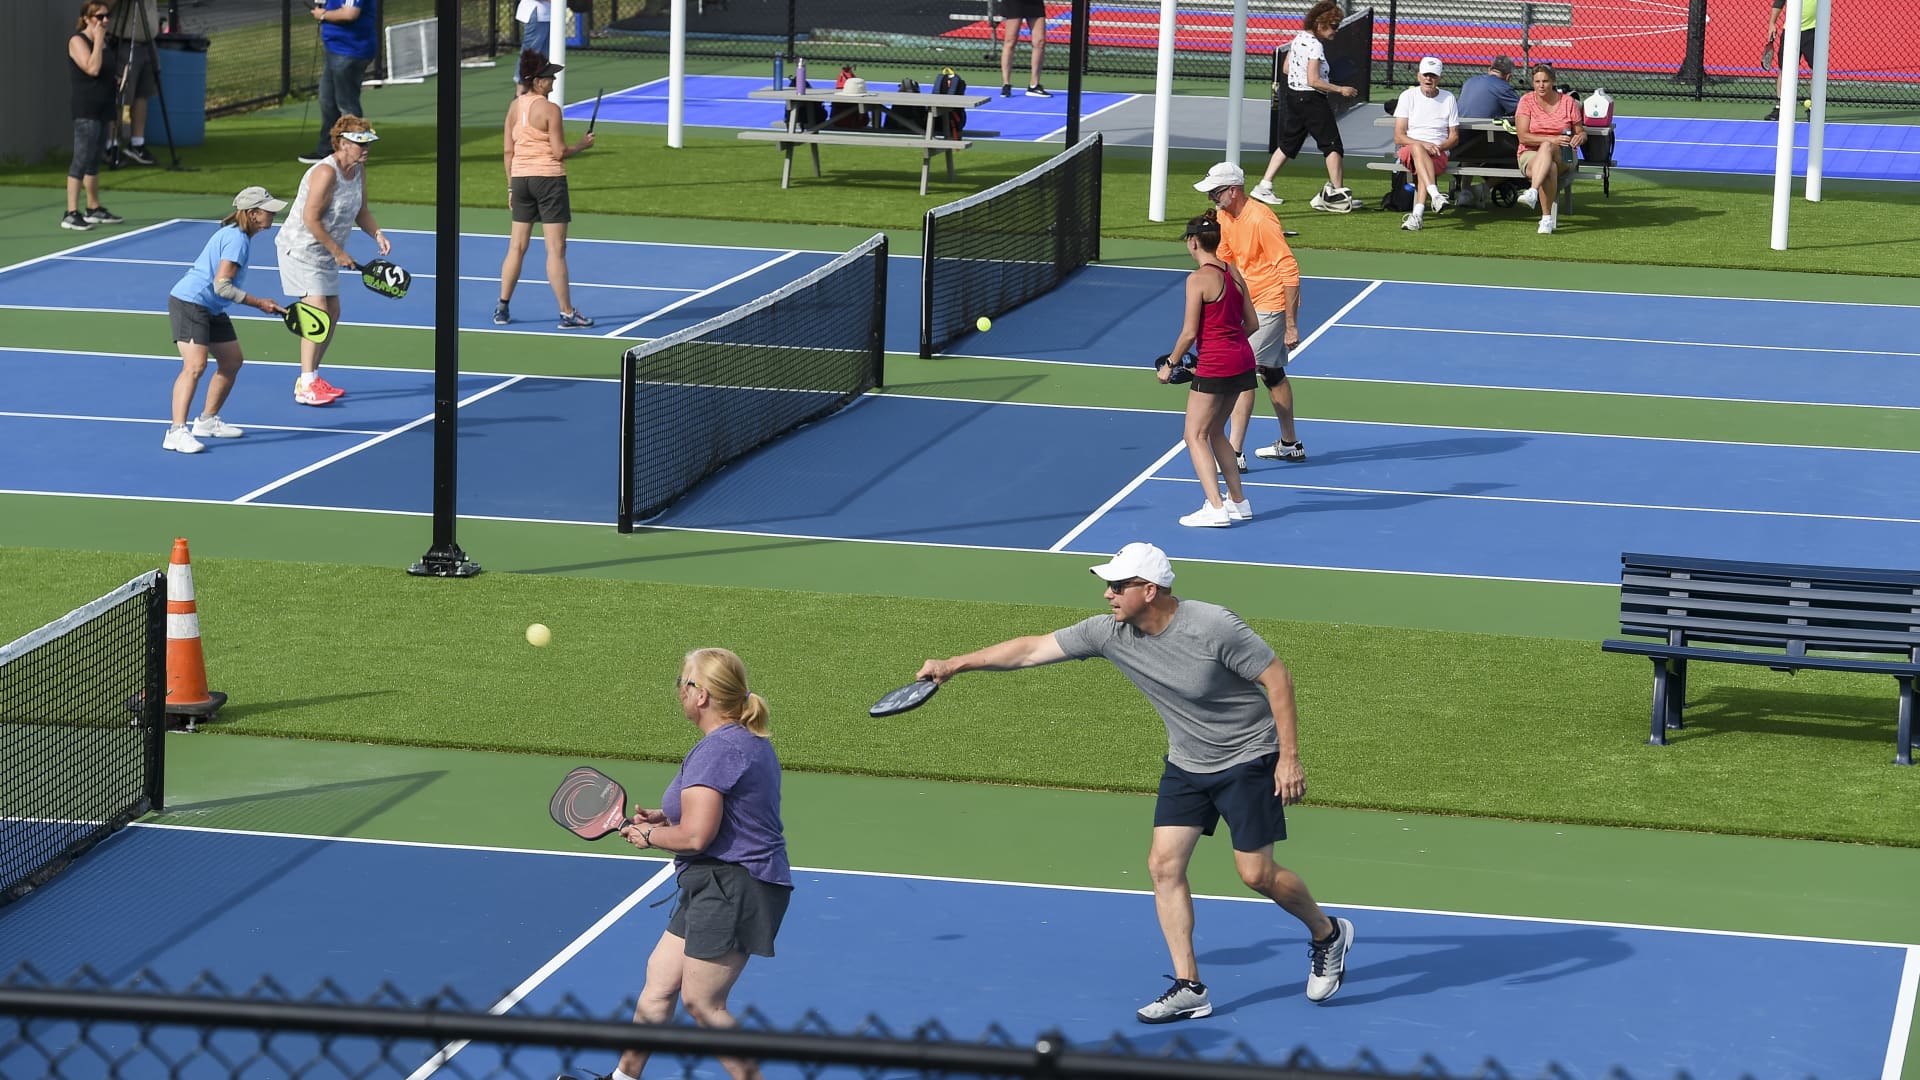 Pickleball, a paddle sport with a whimsical name, is becoming big business